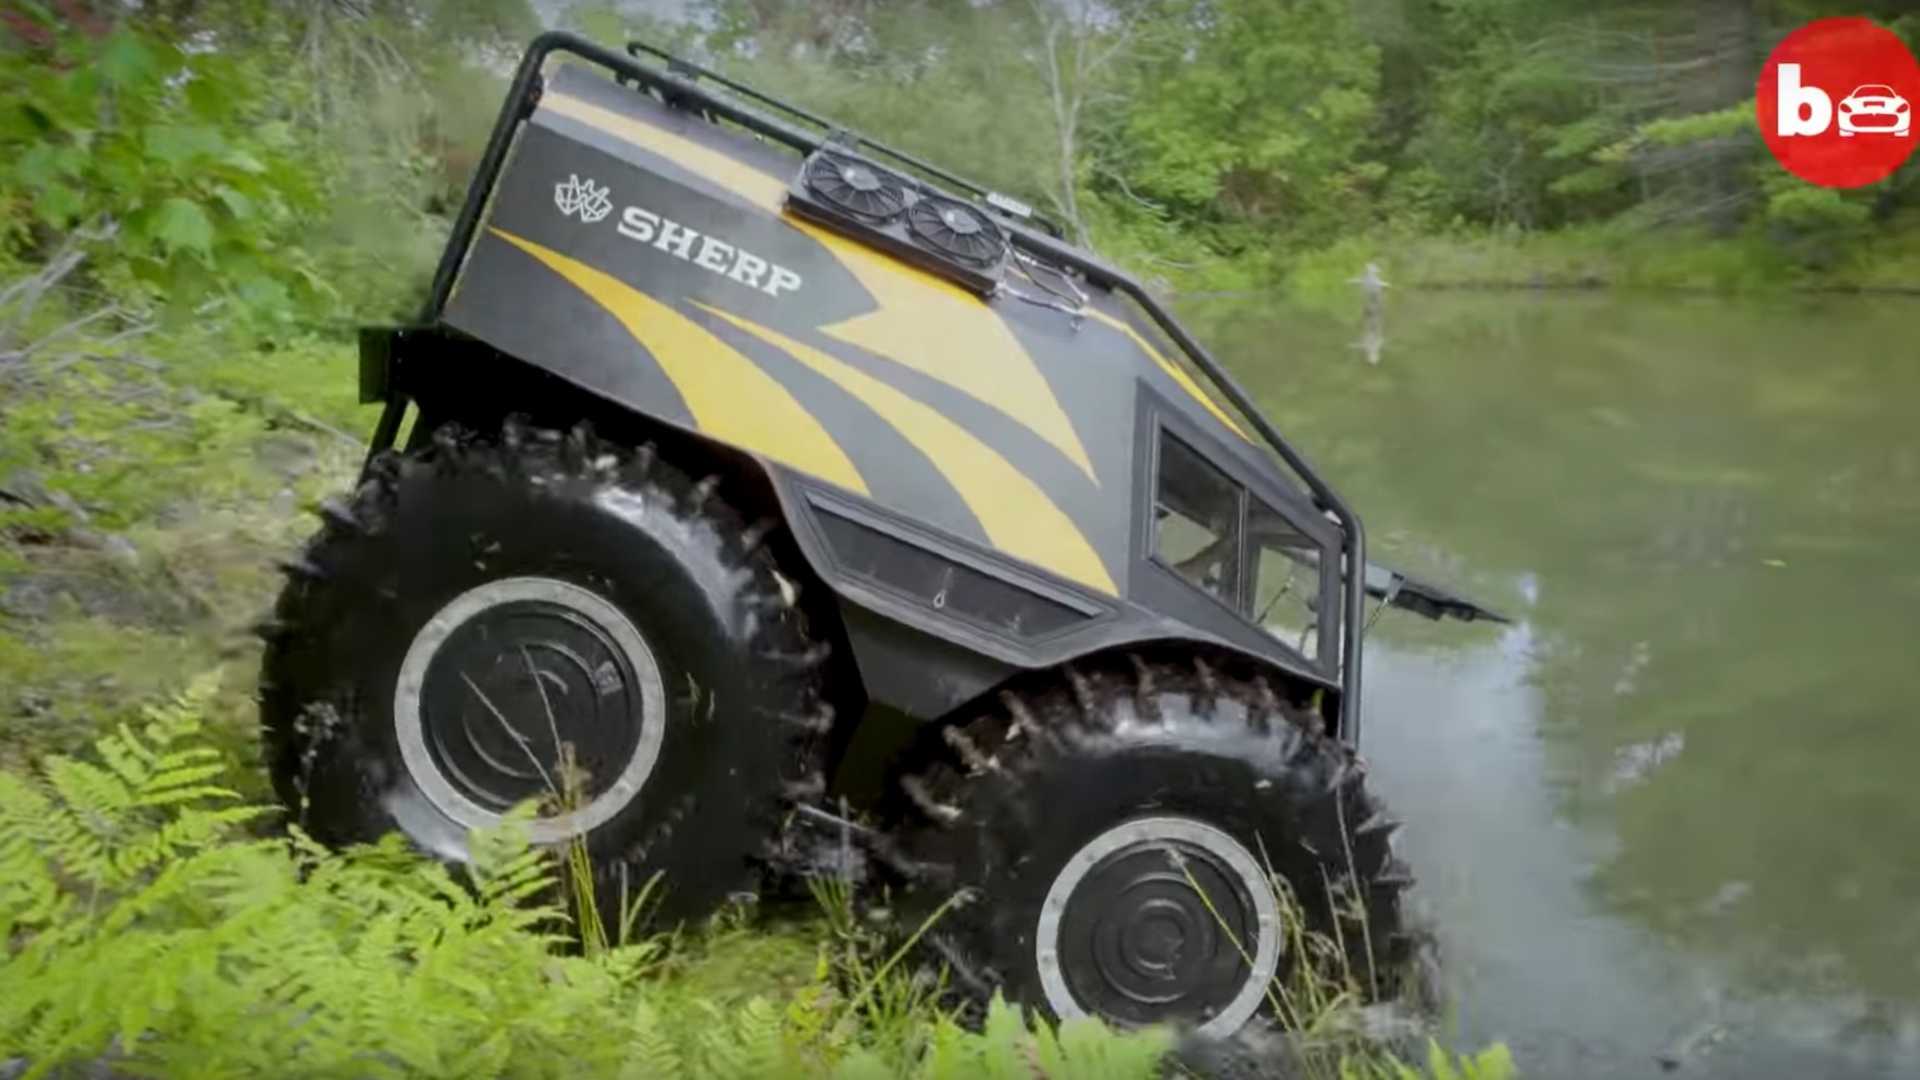 Sherp ATV Is The Ultimate Vehicle To Survive The Zombie Apocalypse